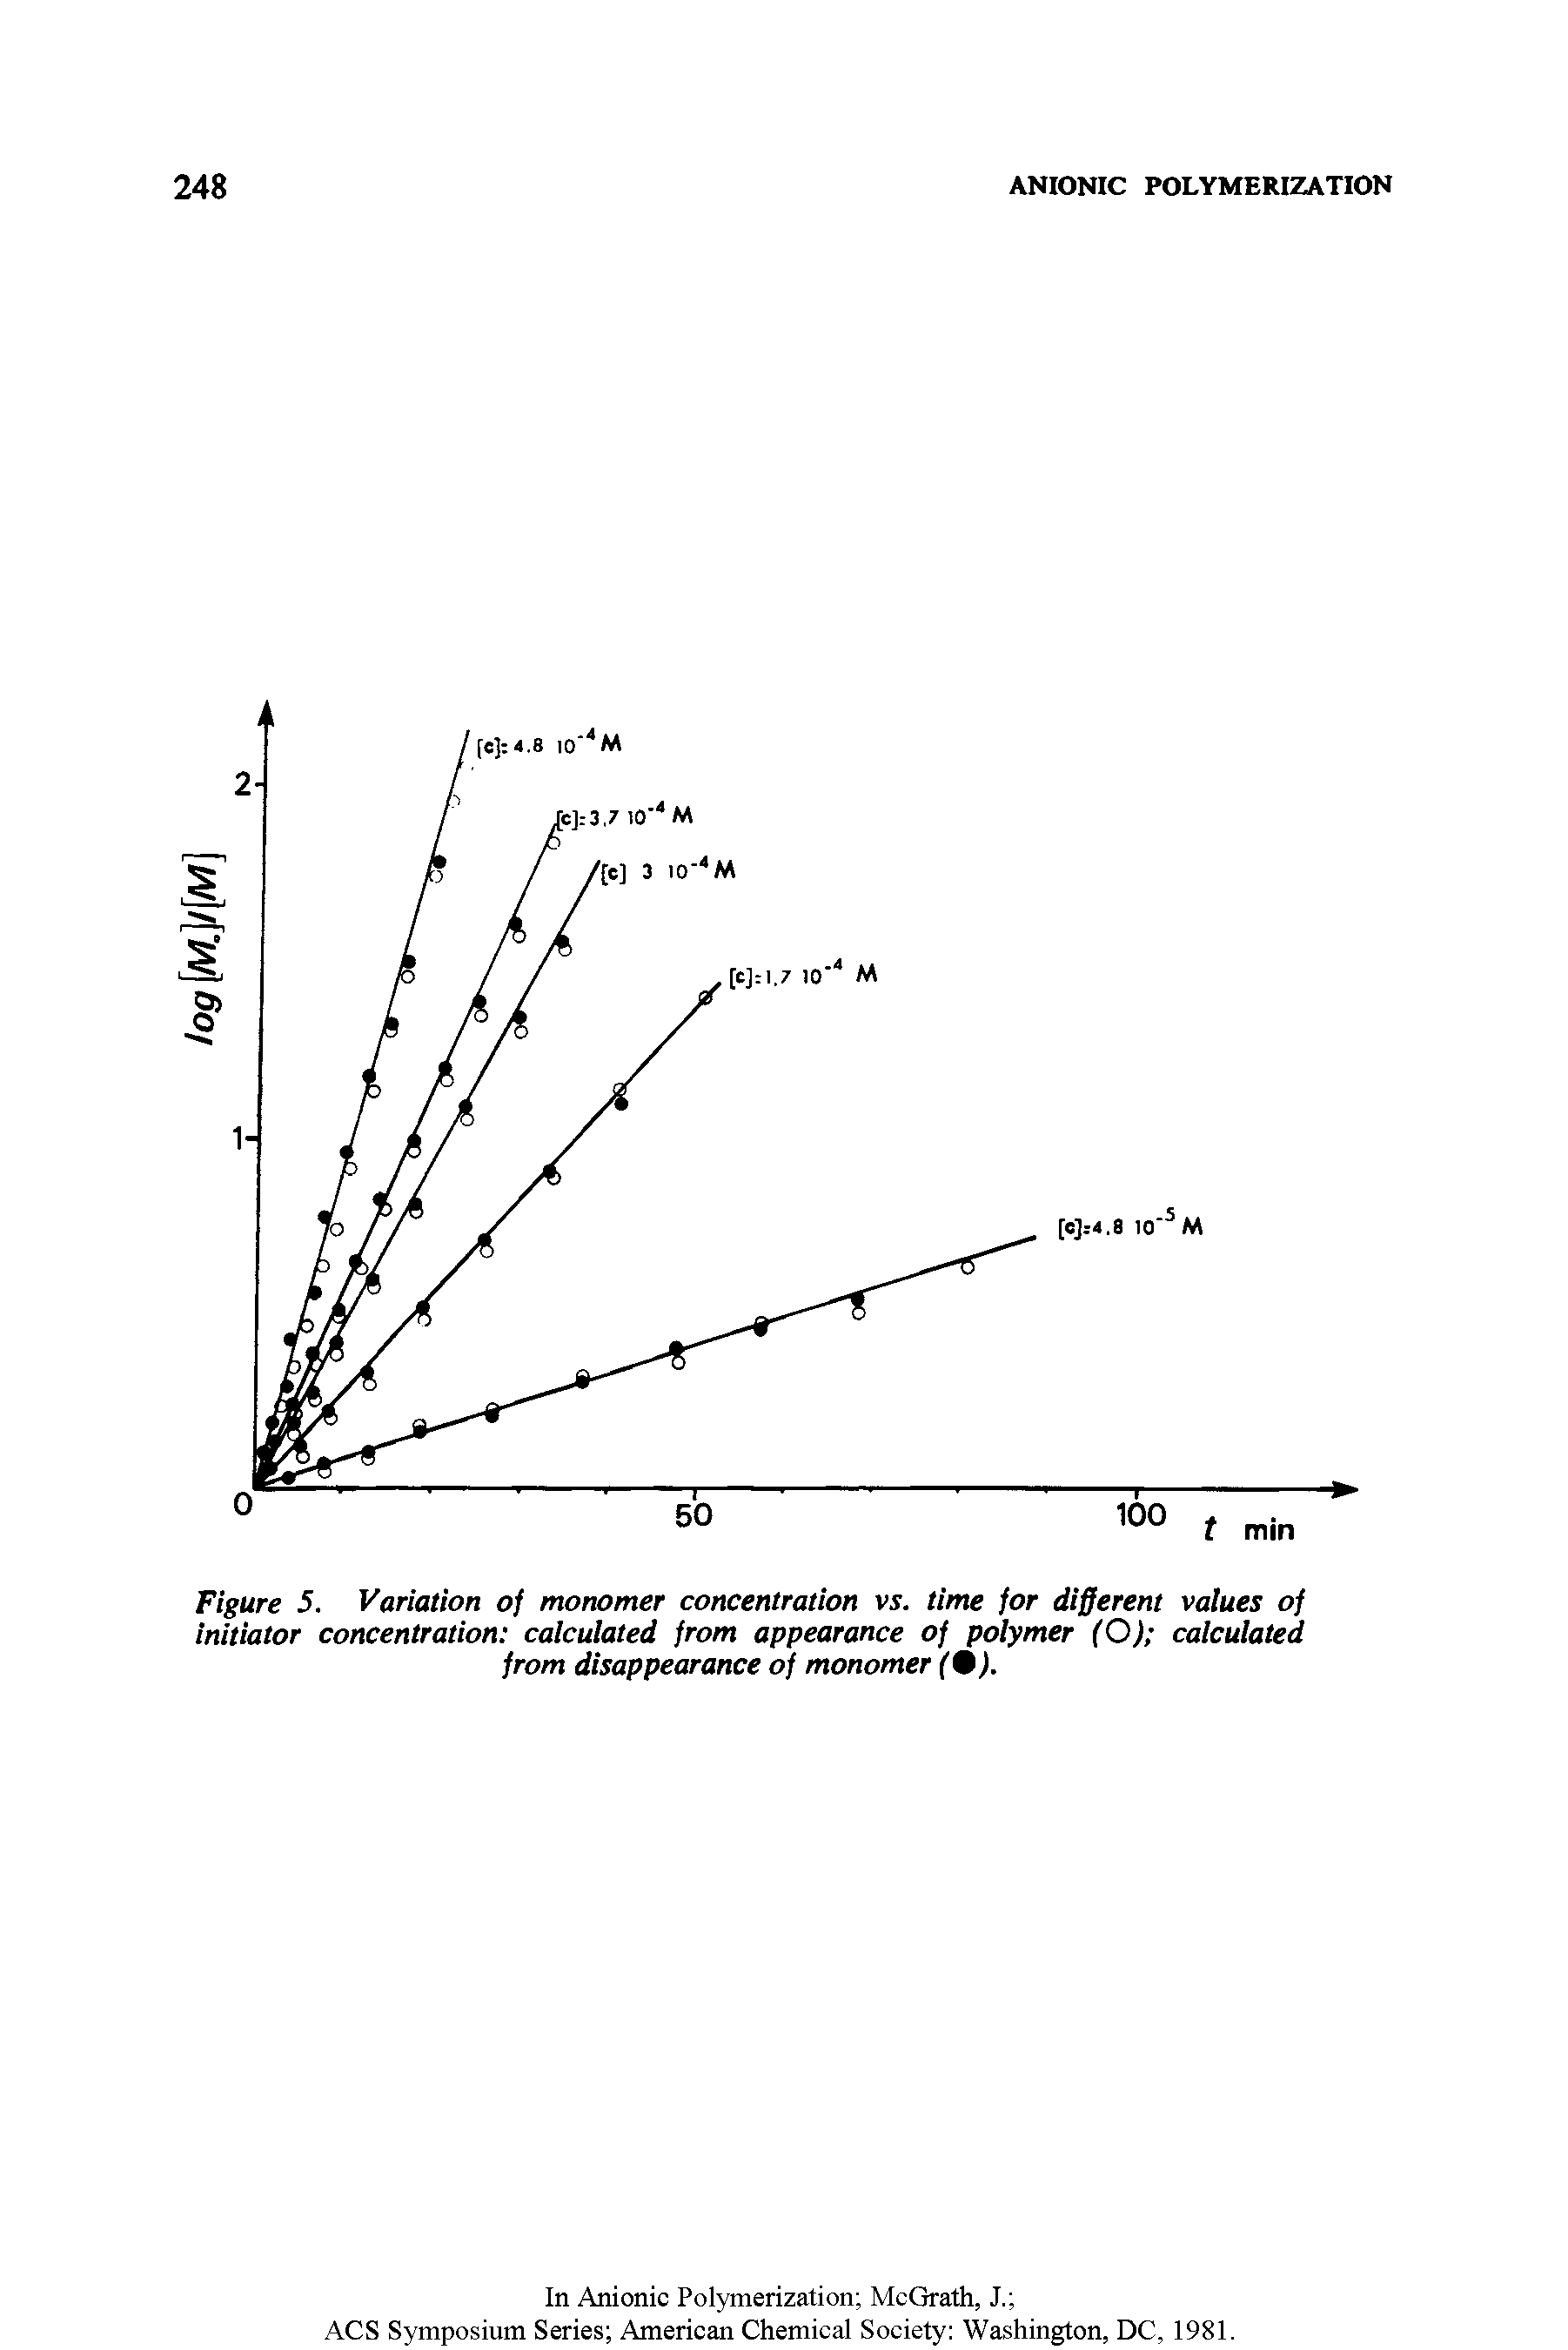 Figure 5. Variation of monomer concentration vs. time for different values of initiator concentration calculated from appearance of polymer (O) calculated from disappearance of monomer (9).